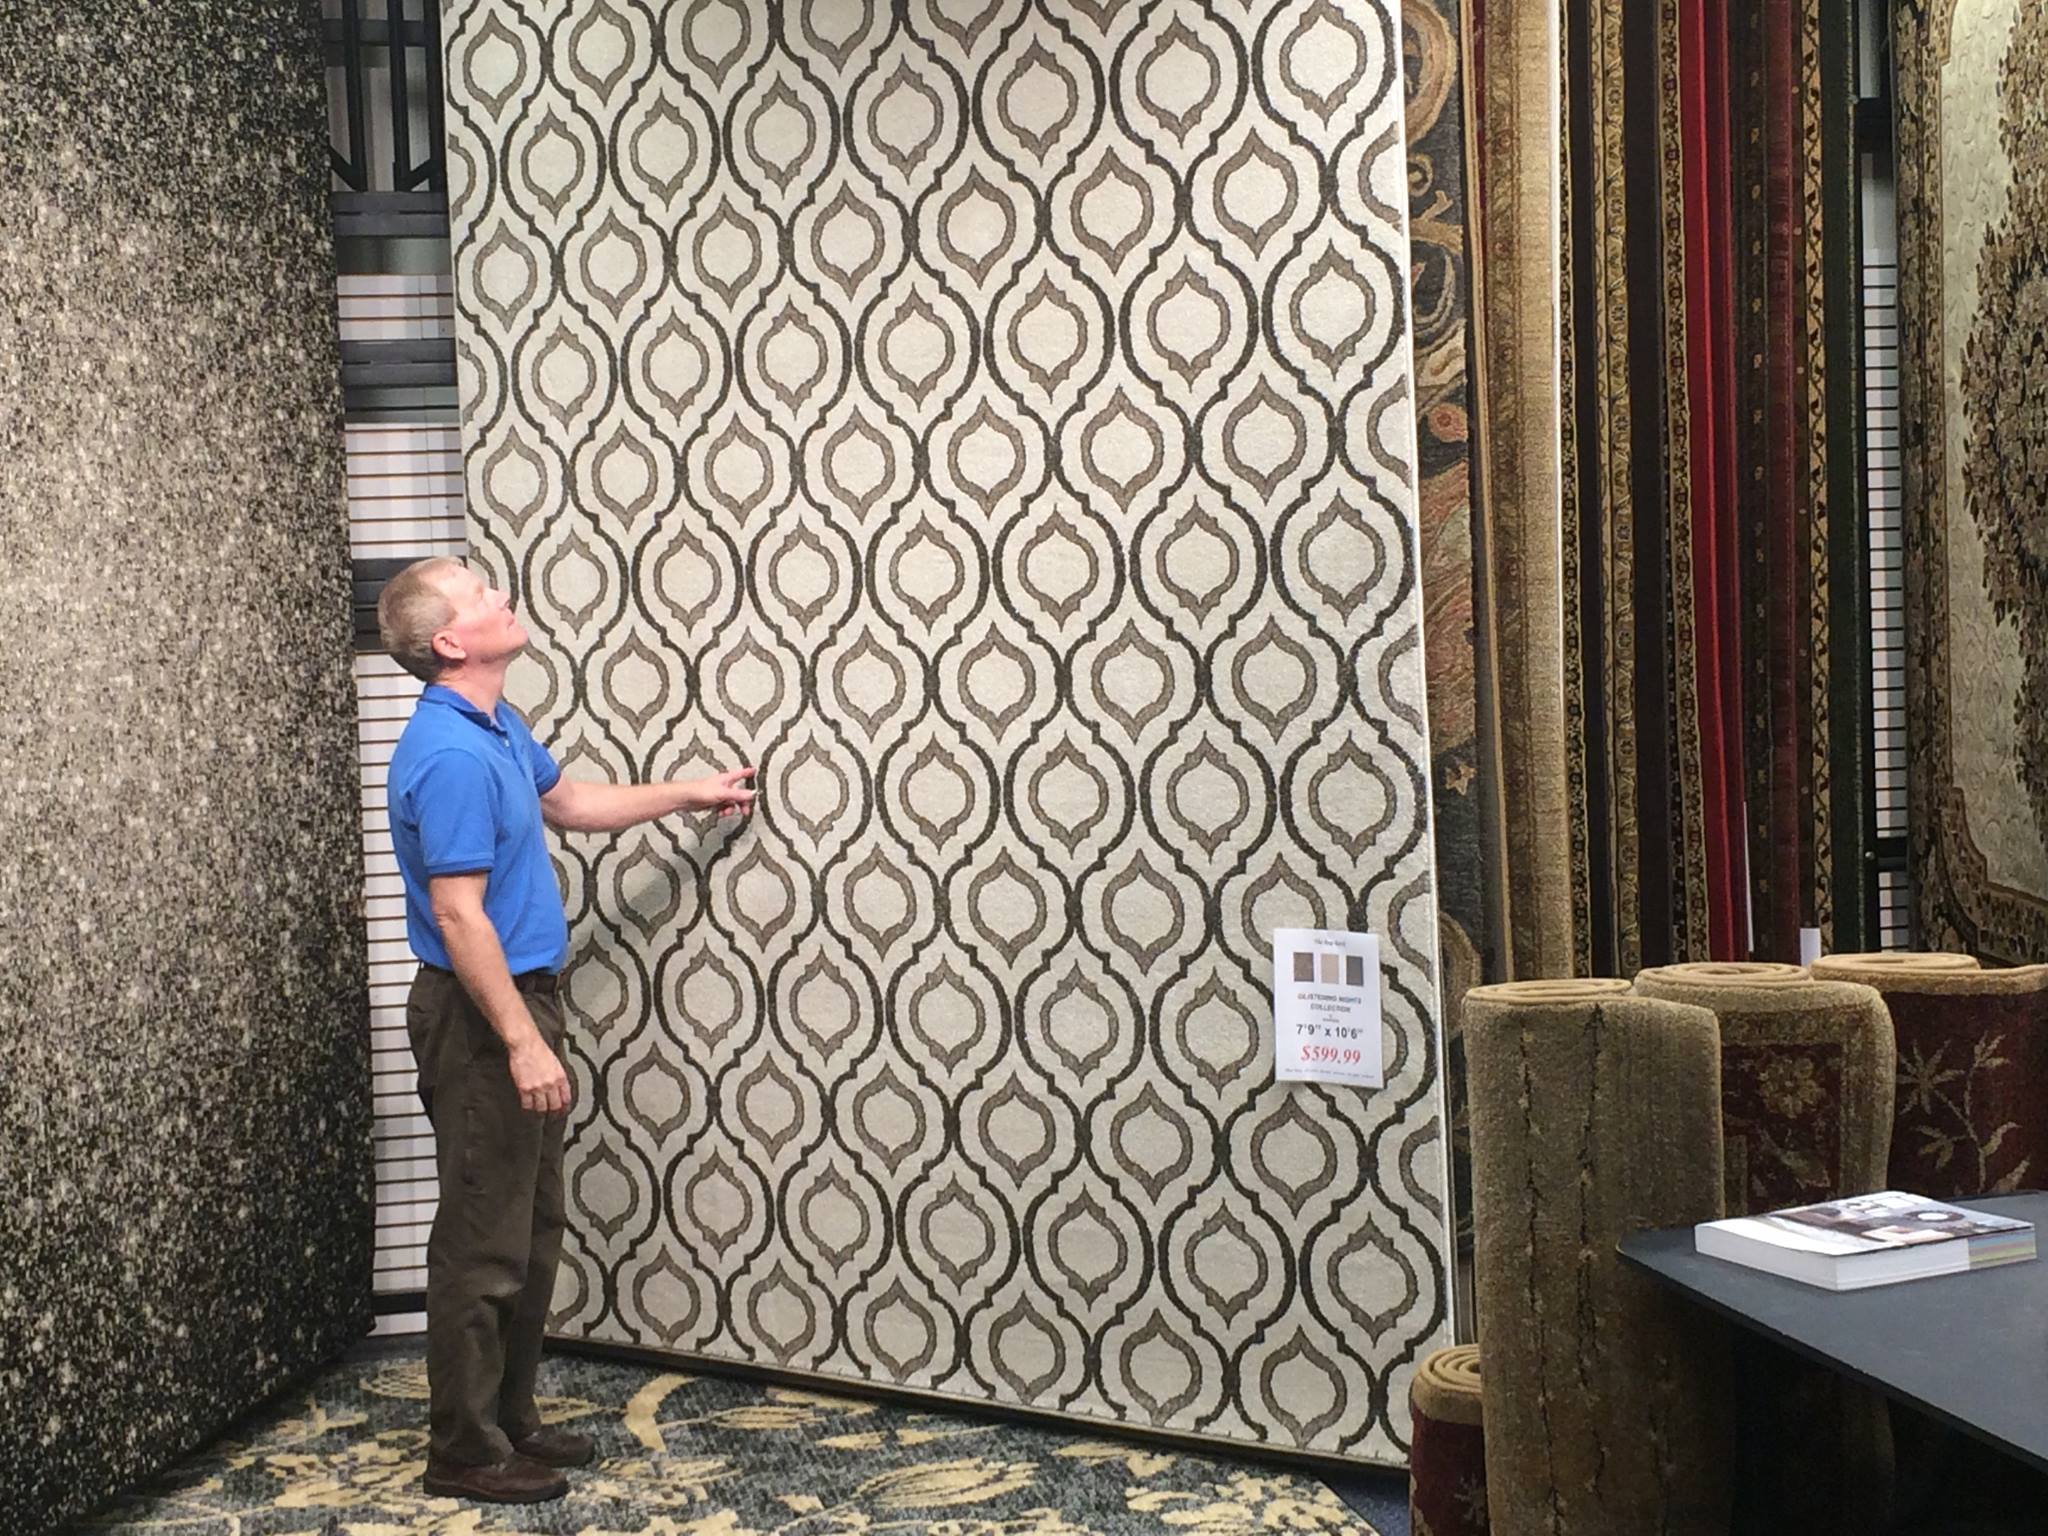 At The Rug Rack shop, viewing display of Muted Color Area rugs - Springfield, IL